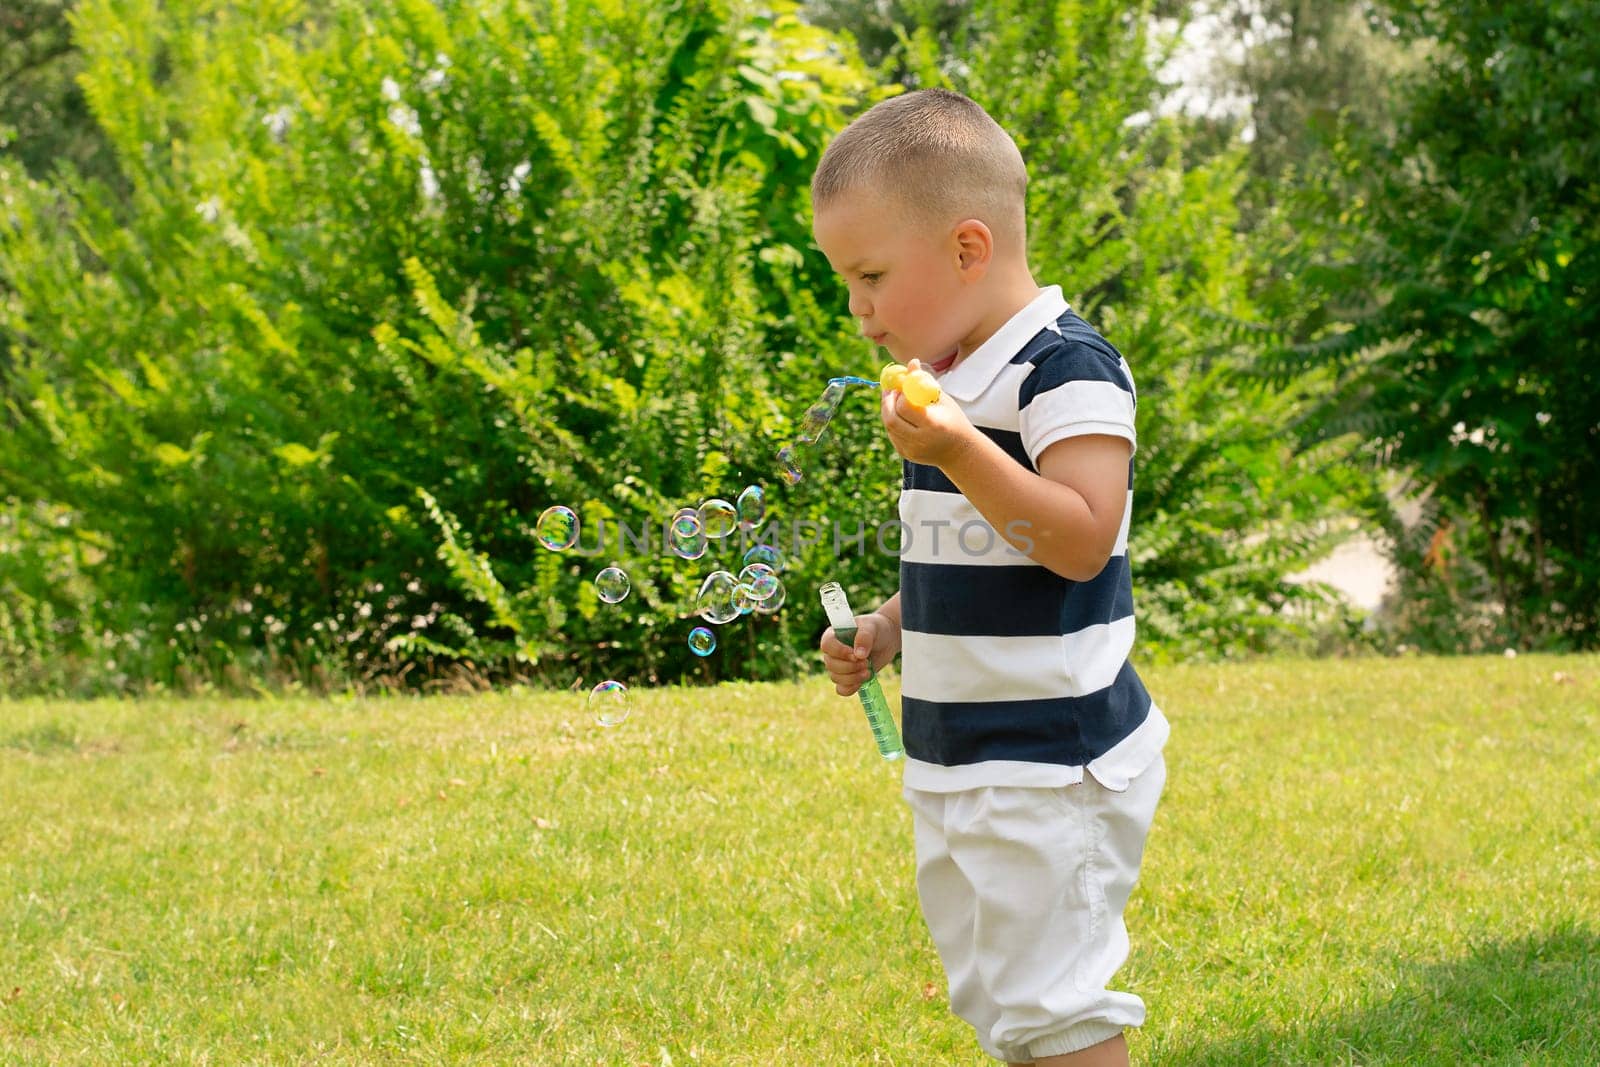 A handsome caucasoid boy 4 years old, in a striped T-shirt, plays outdoors in a green park in summer and blows soap bubbles in the sun. Childhood concept.